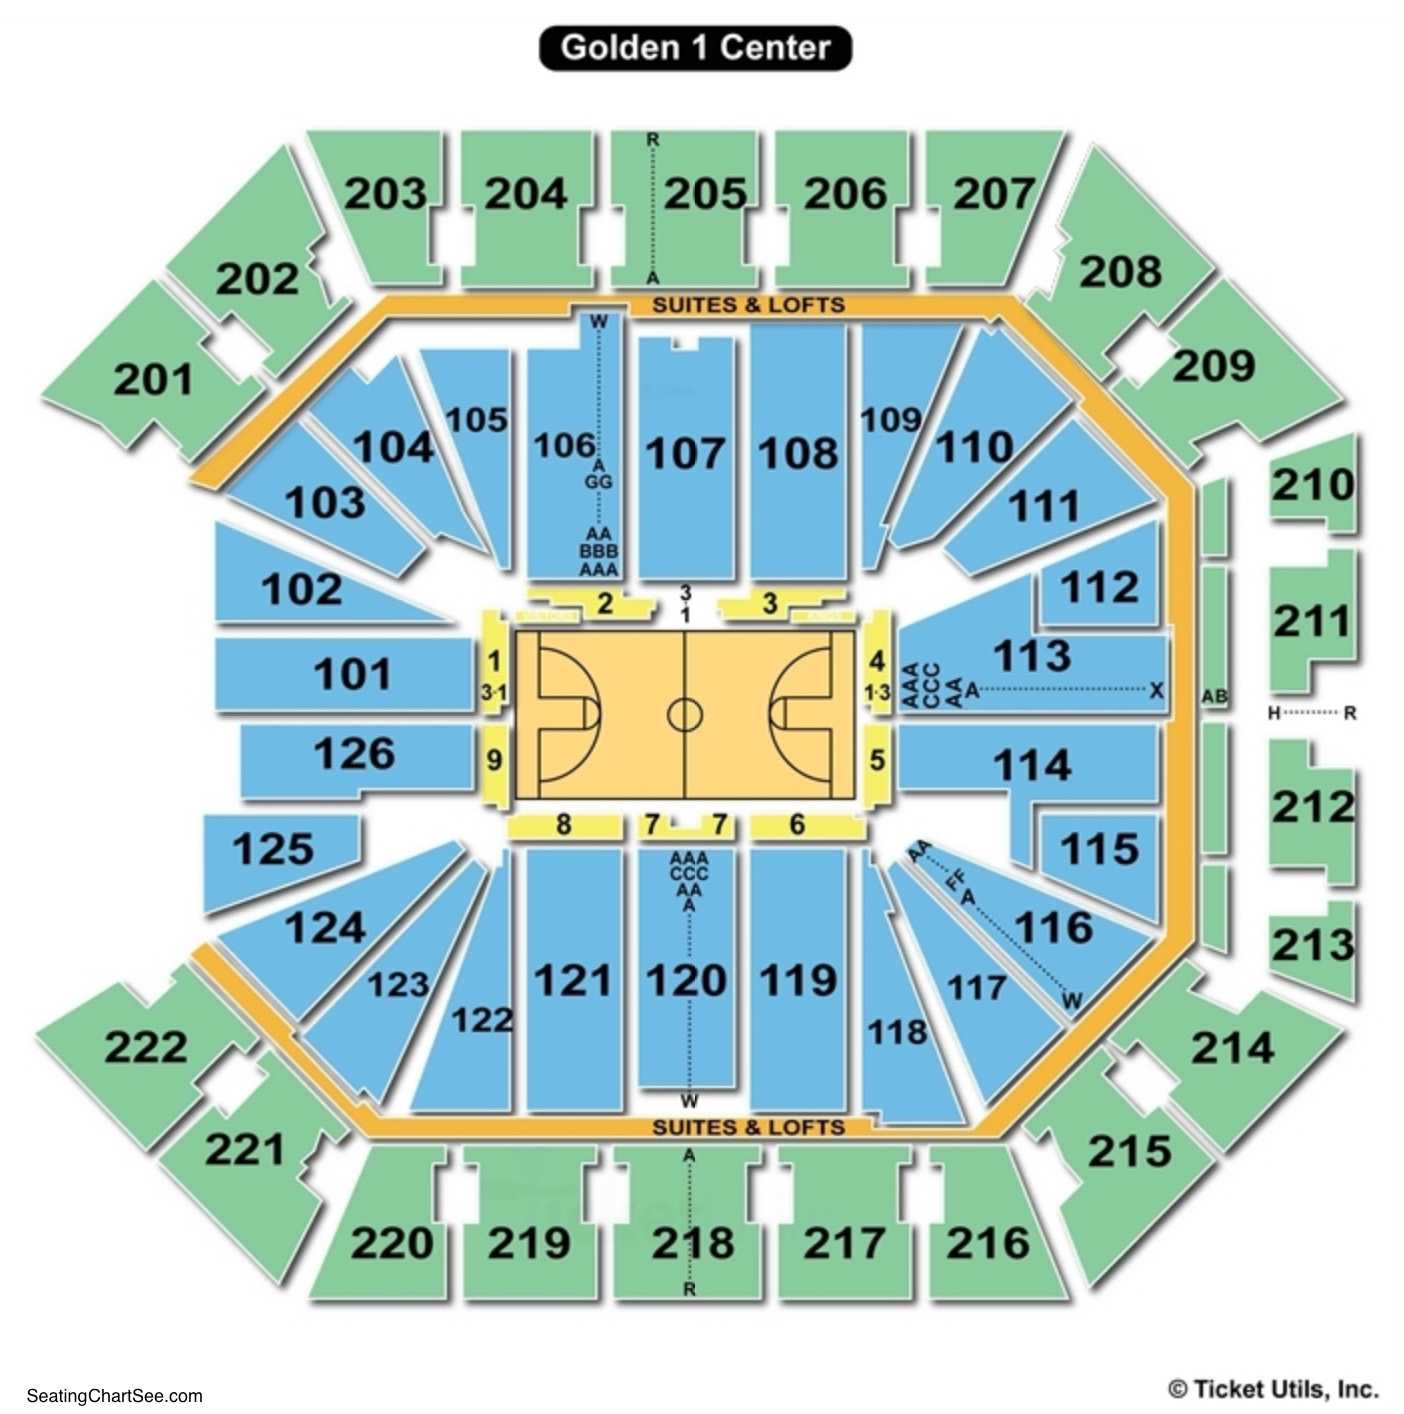 Golden 1 Center Seating Charts Views